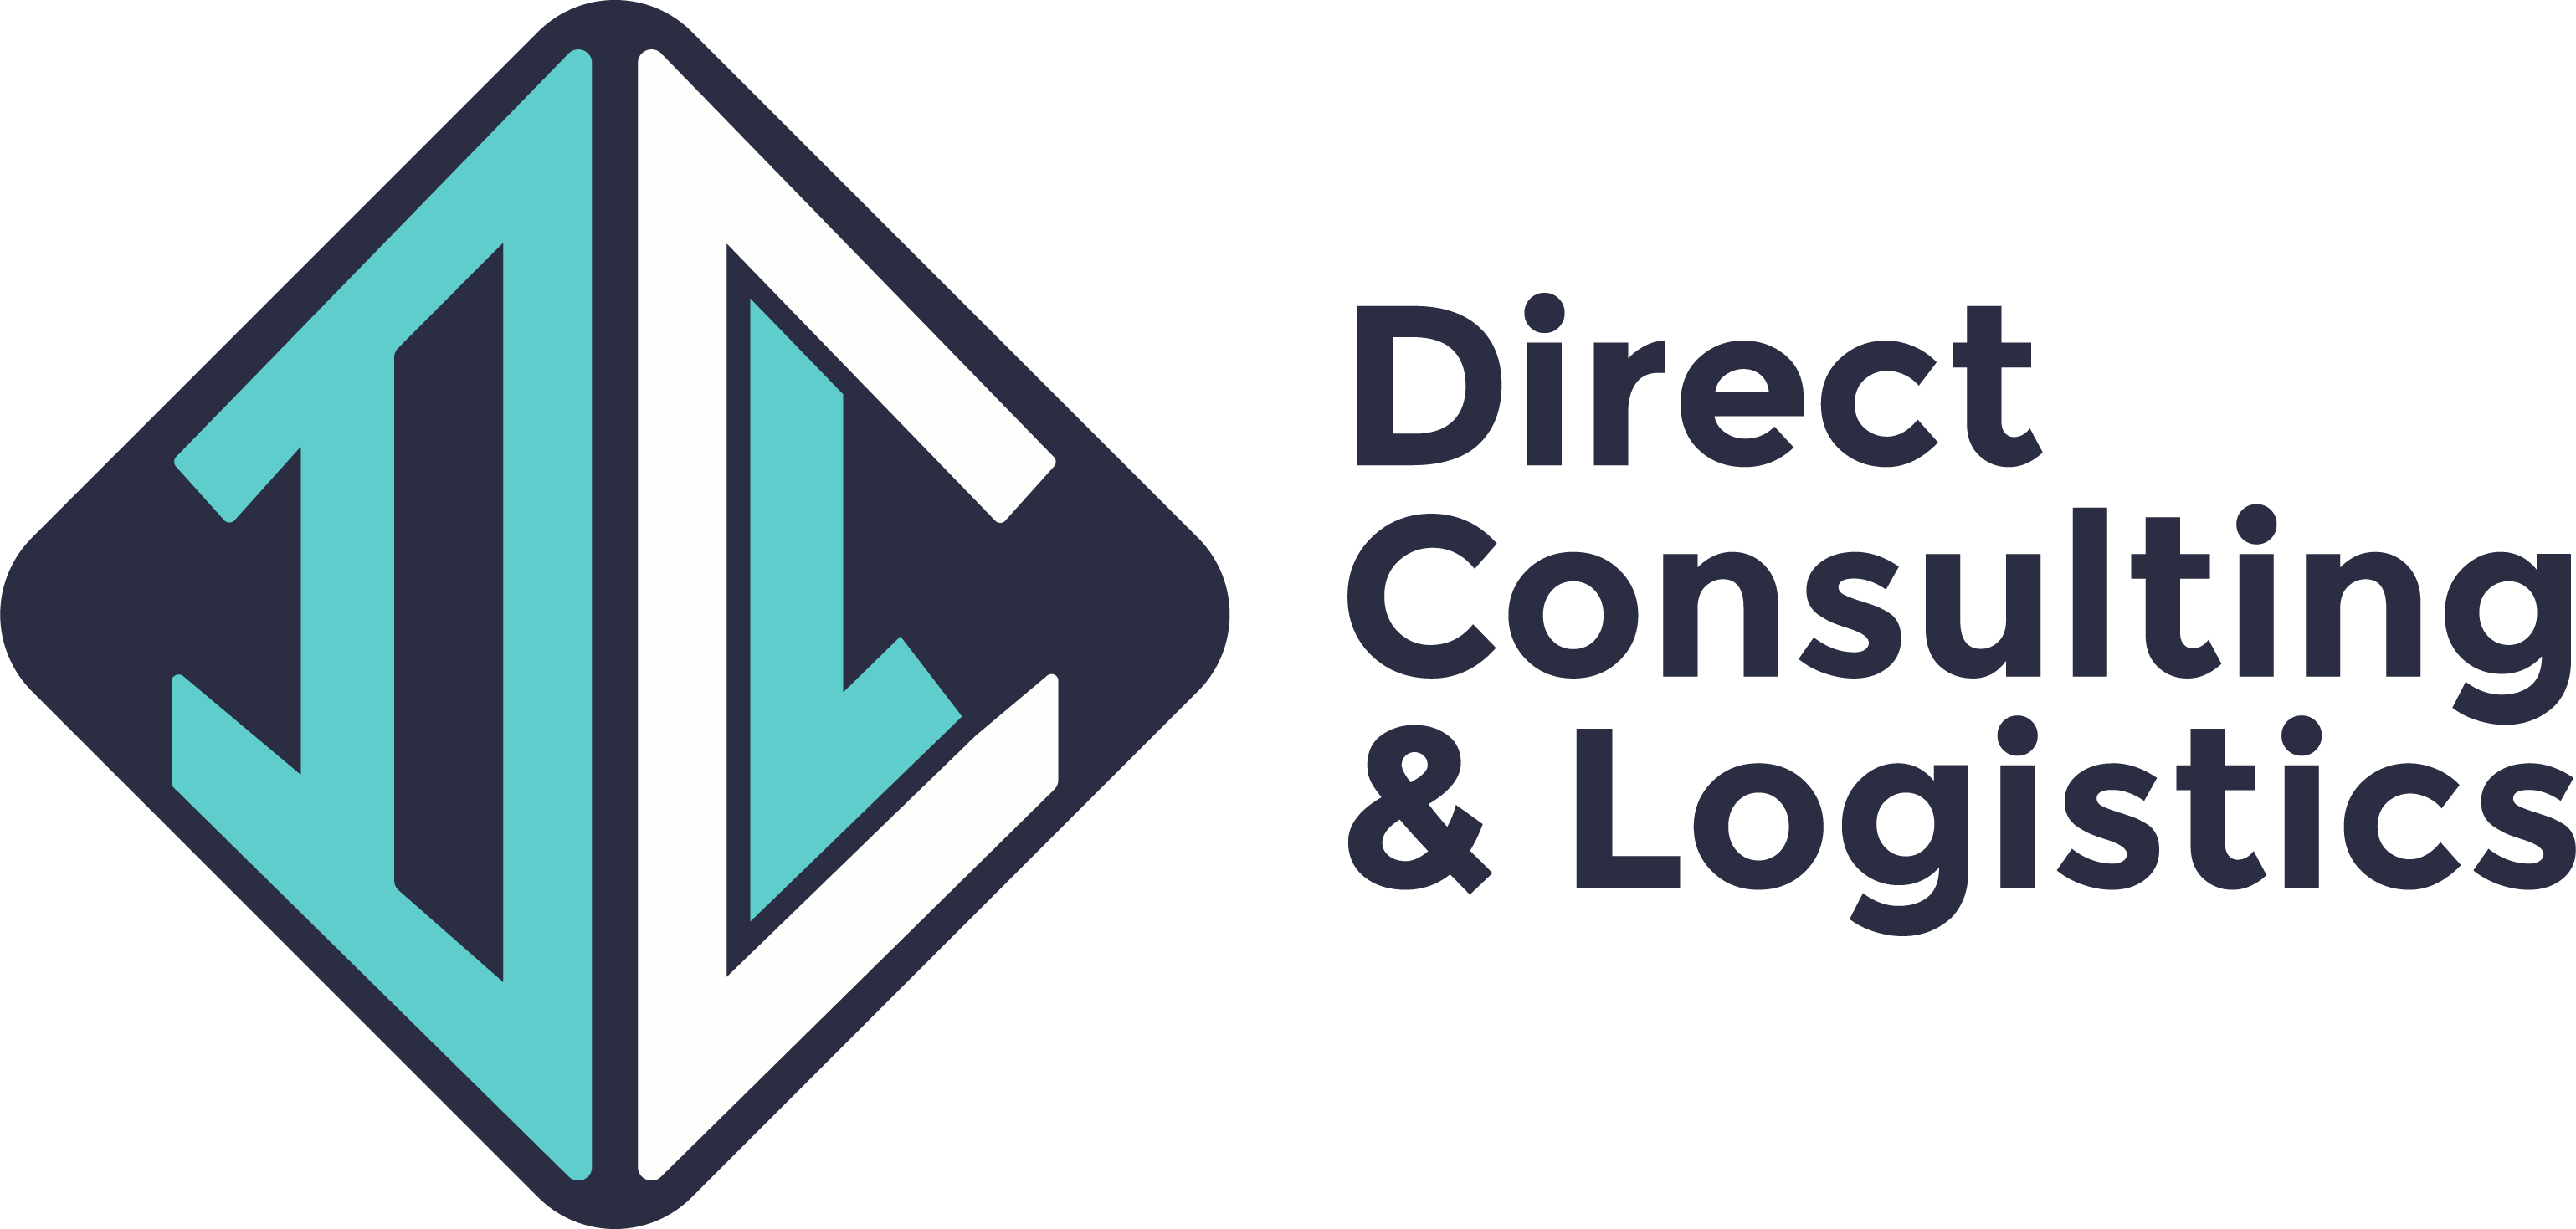 Direct Consulting and Logistics